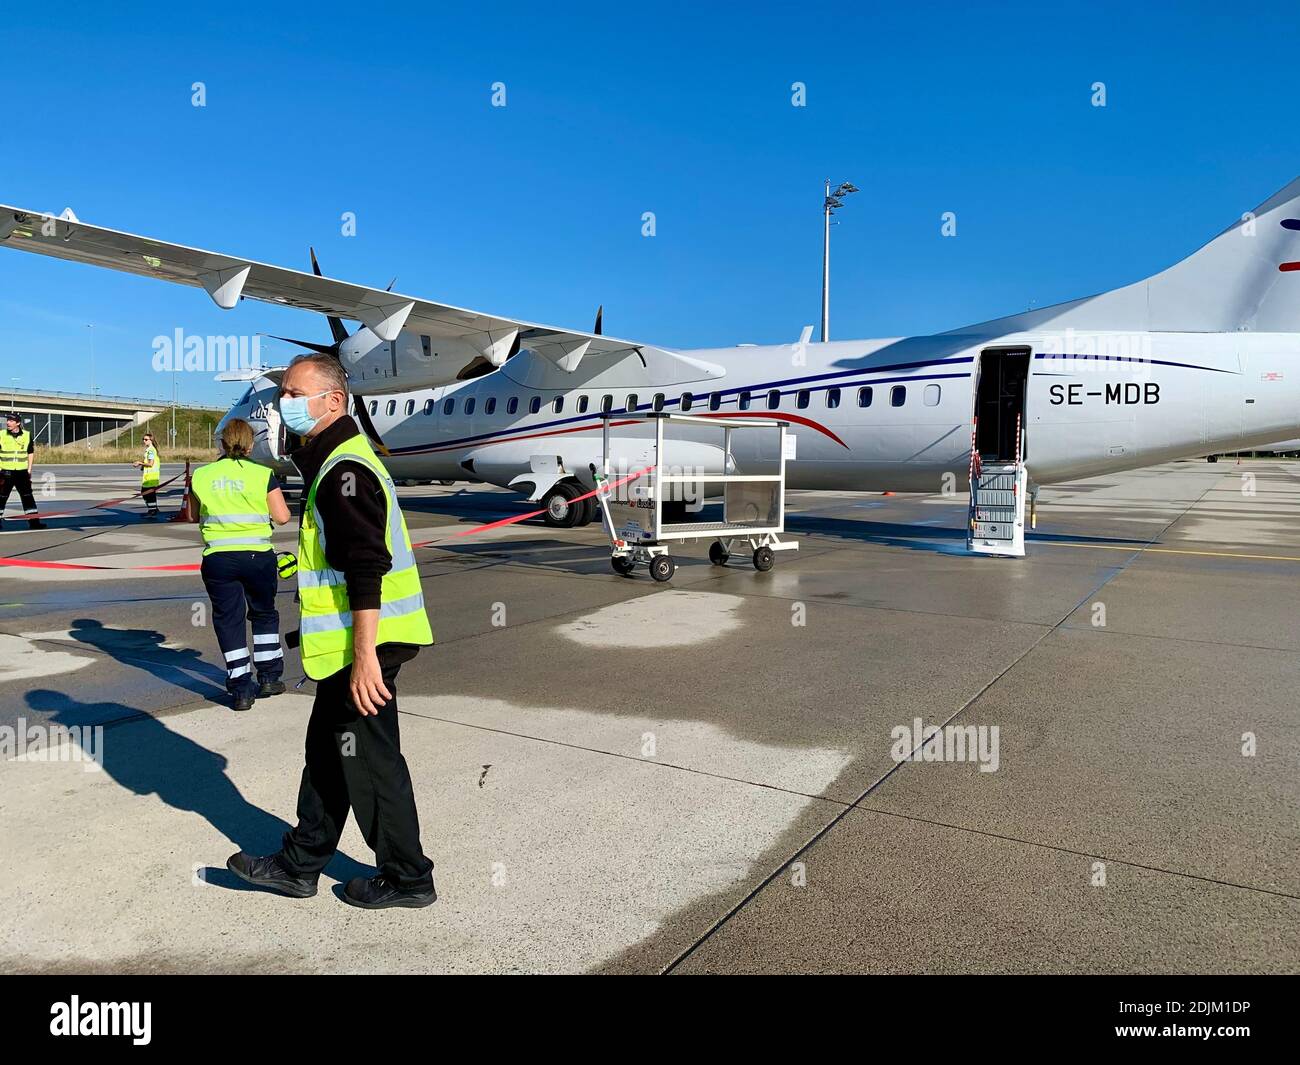 A Lübeck Airline aircraft is standing at the airport and waiting for departure. Ground staff secure the access area Stock Photo